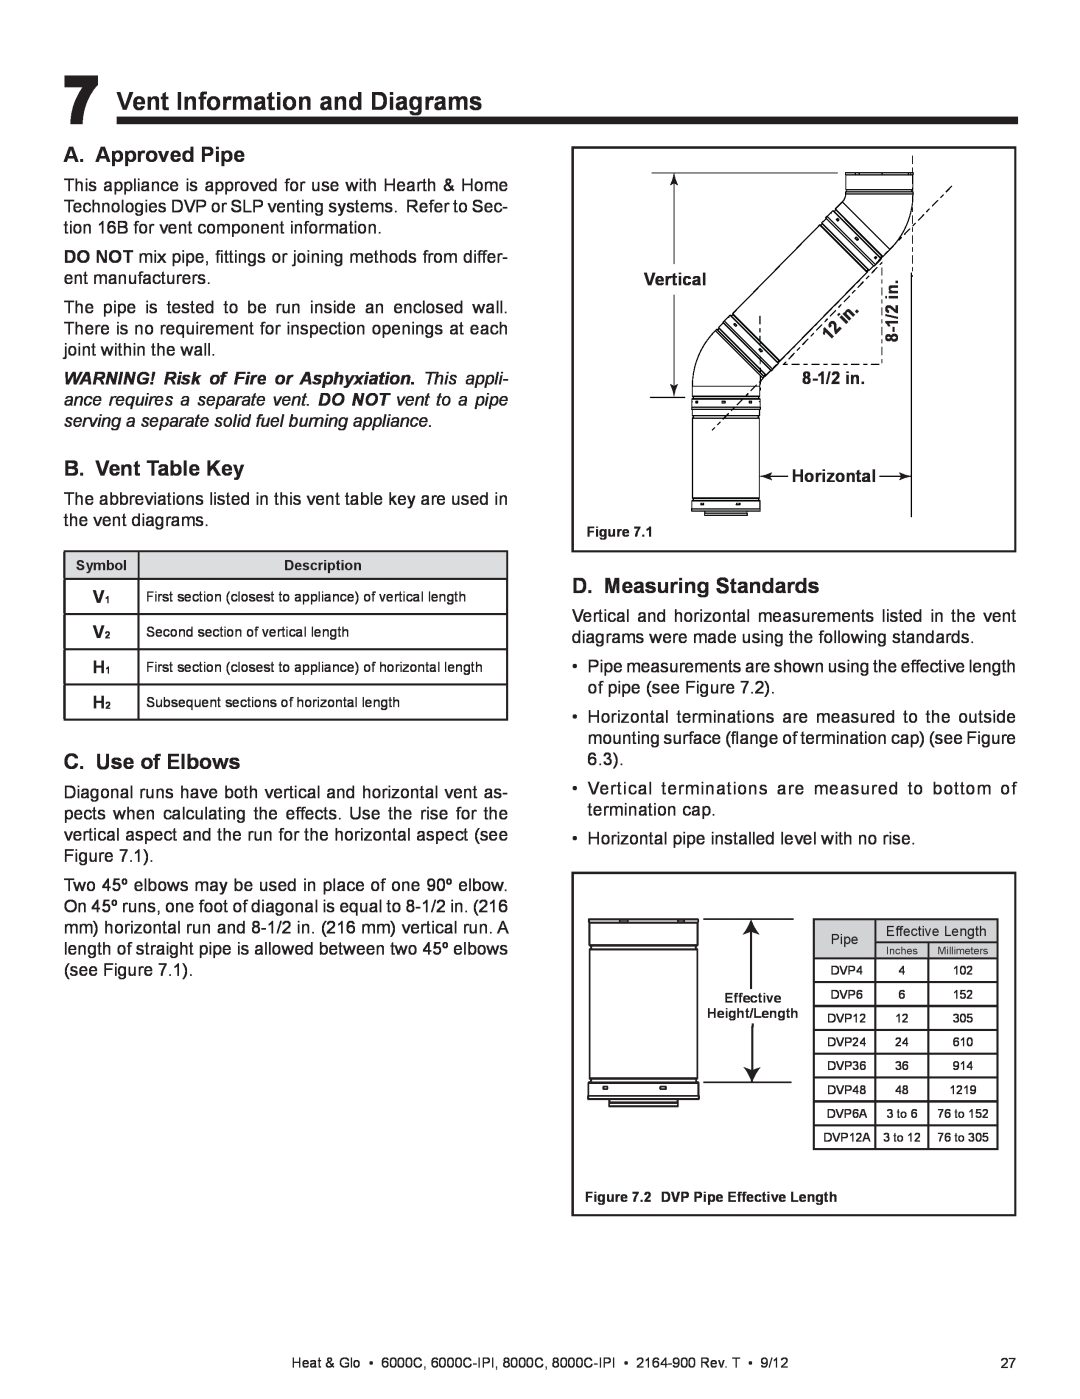 Heat & Glo LifeStyle 6000C manual Vent Information and Diagrams, A. Approved Pipe, B. Vent Table Key, C. Use of Elbows 